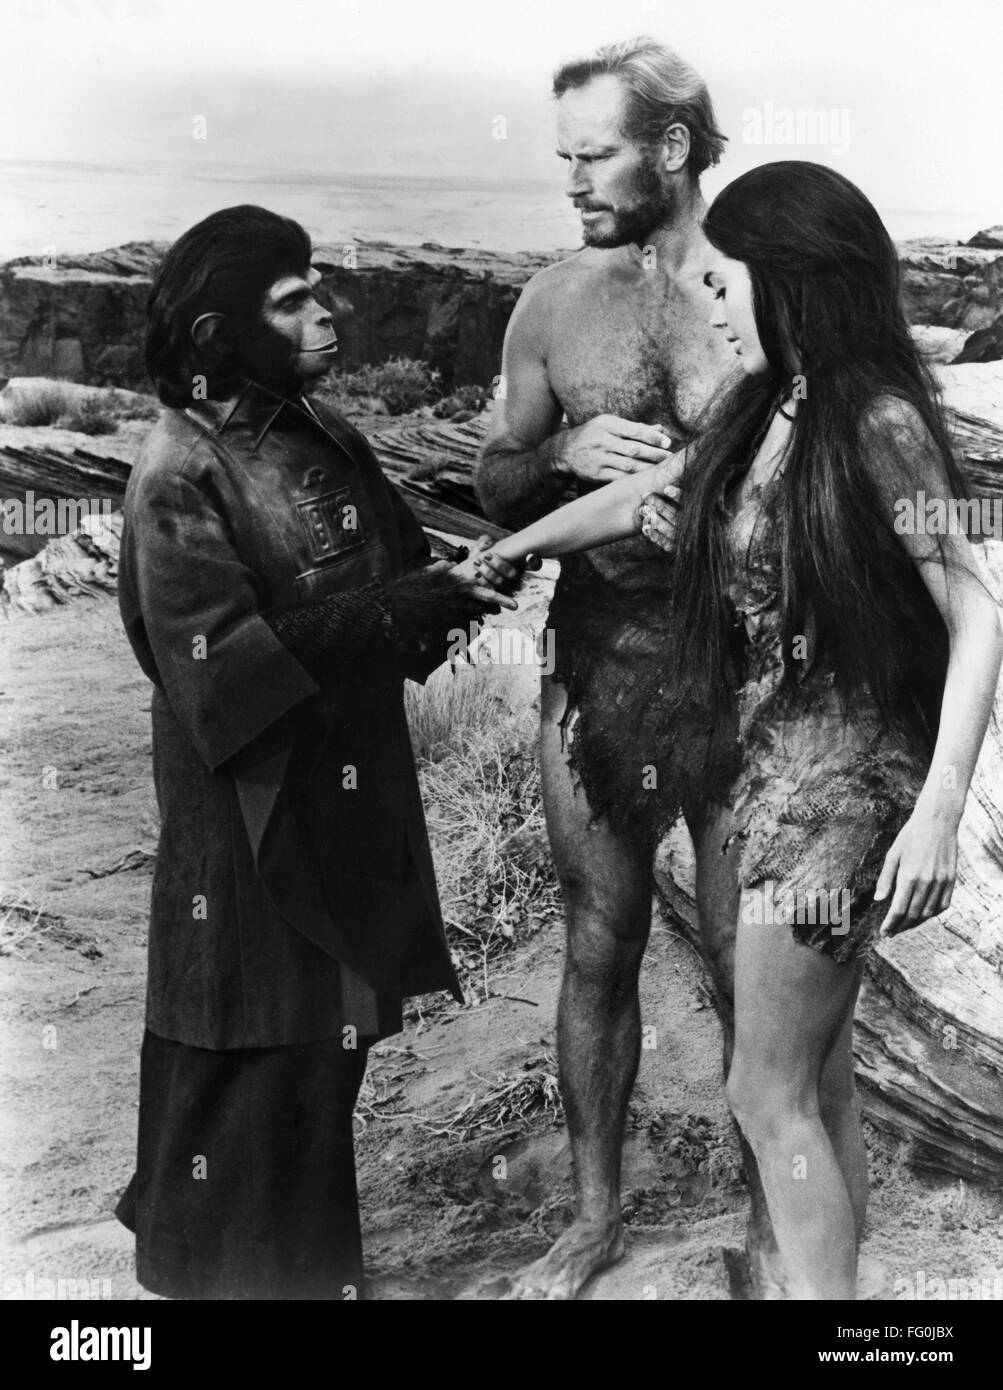 PLANET OF THE APES, 1968. /nCharleton Heston and Linda Harrison in a scene from the film, 'Planet of the Apes,' directed by Franklin J. Schaffner, 1968. Stock Photo